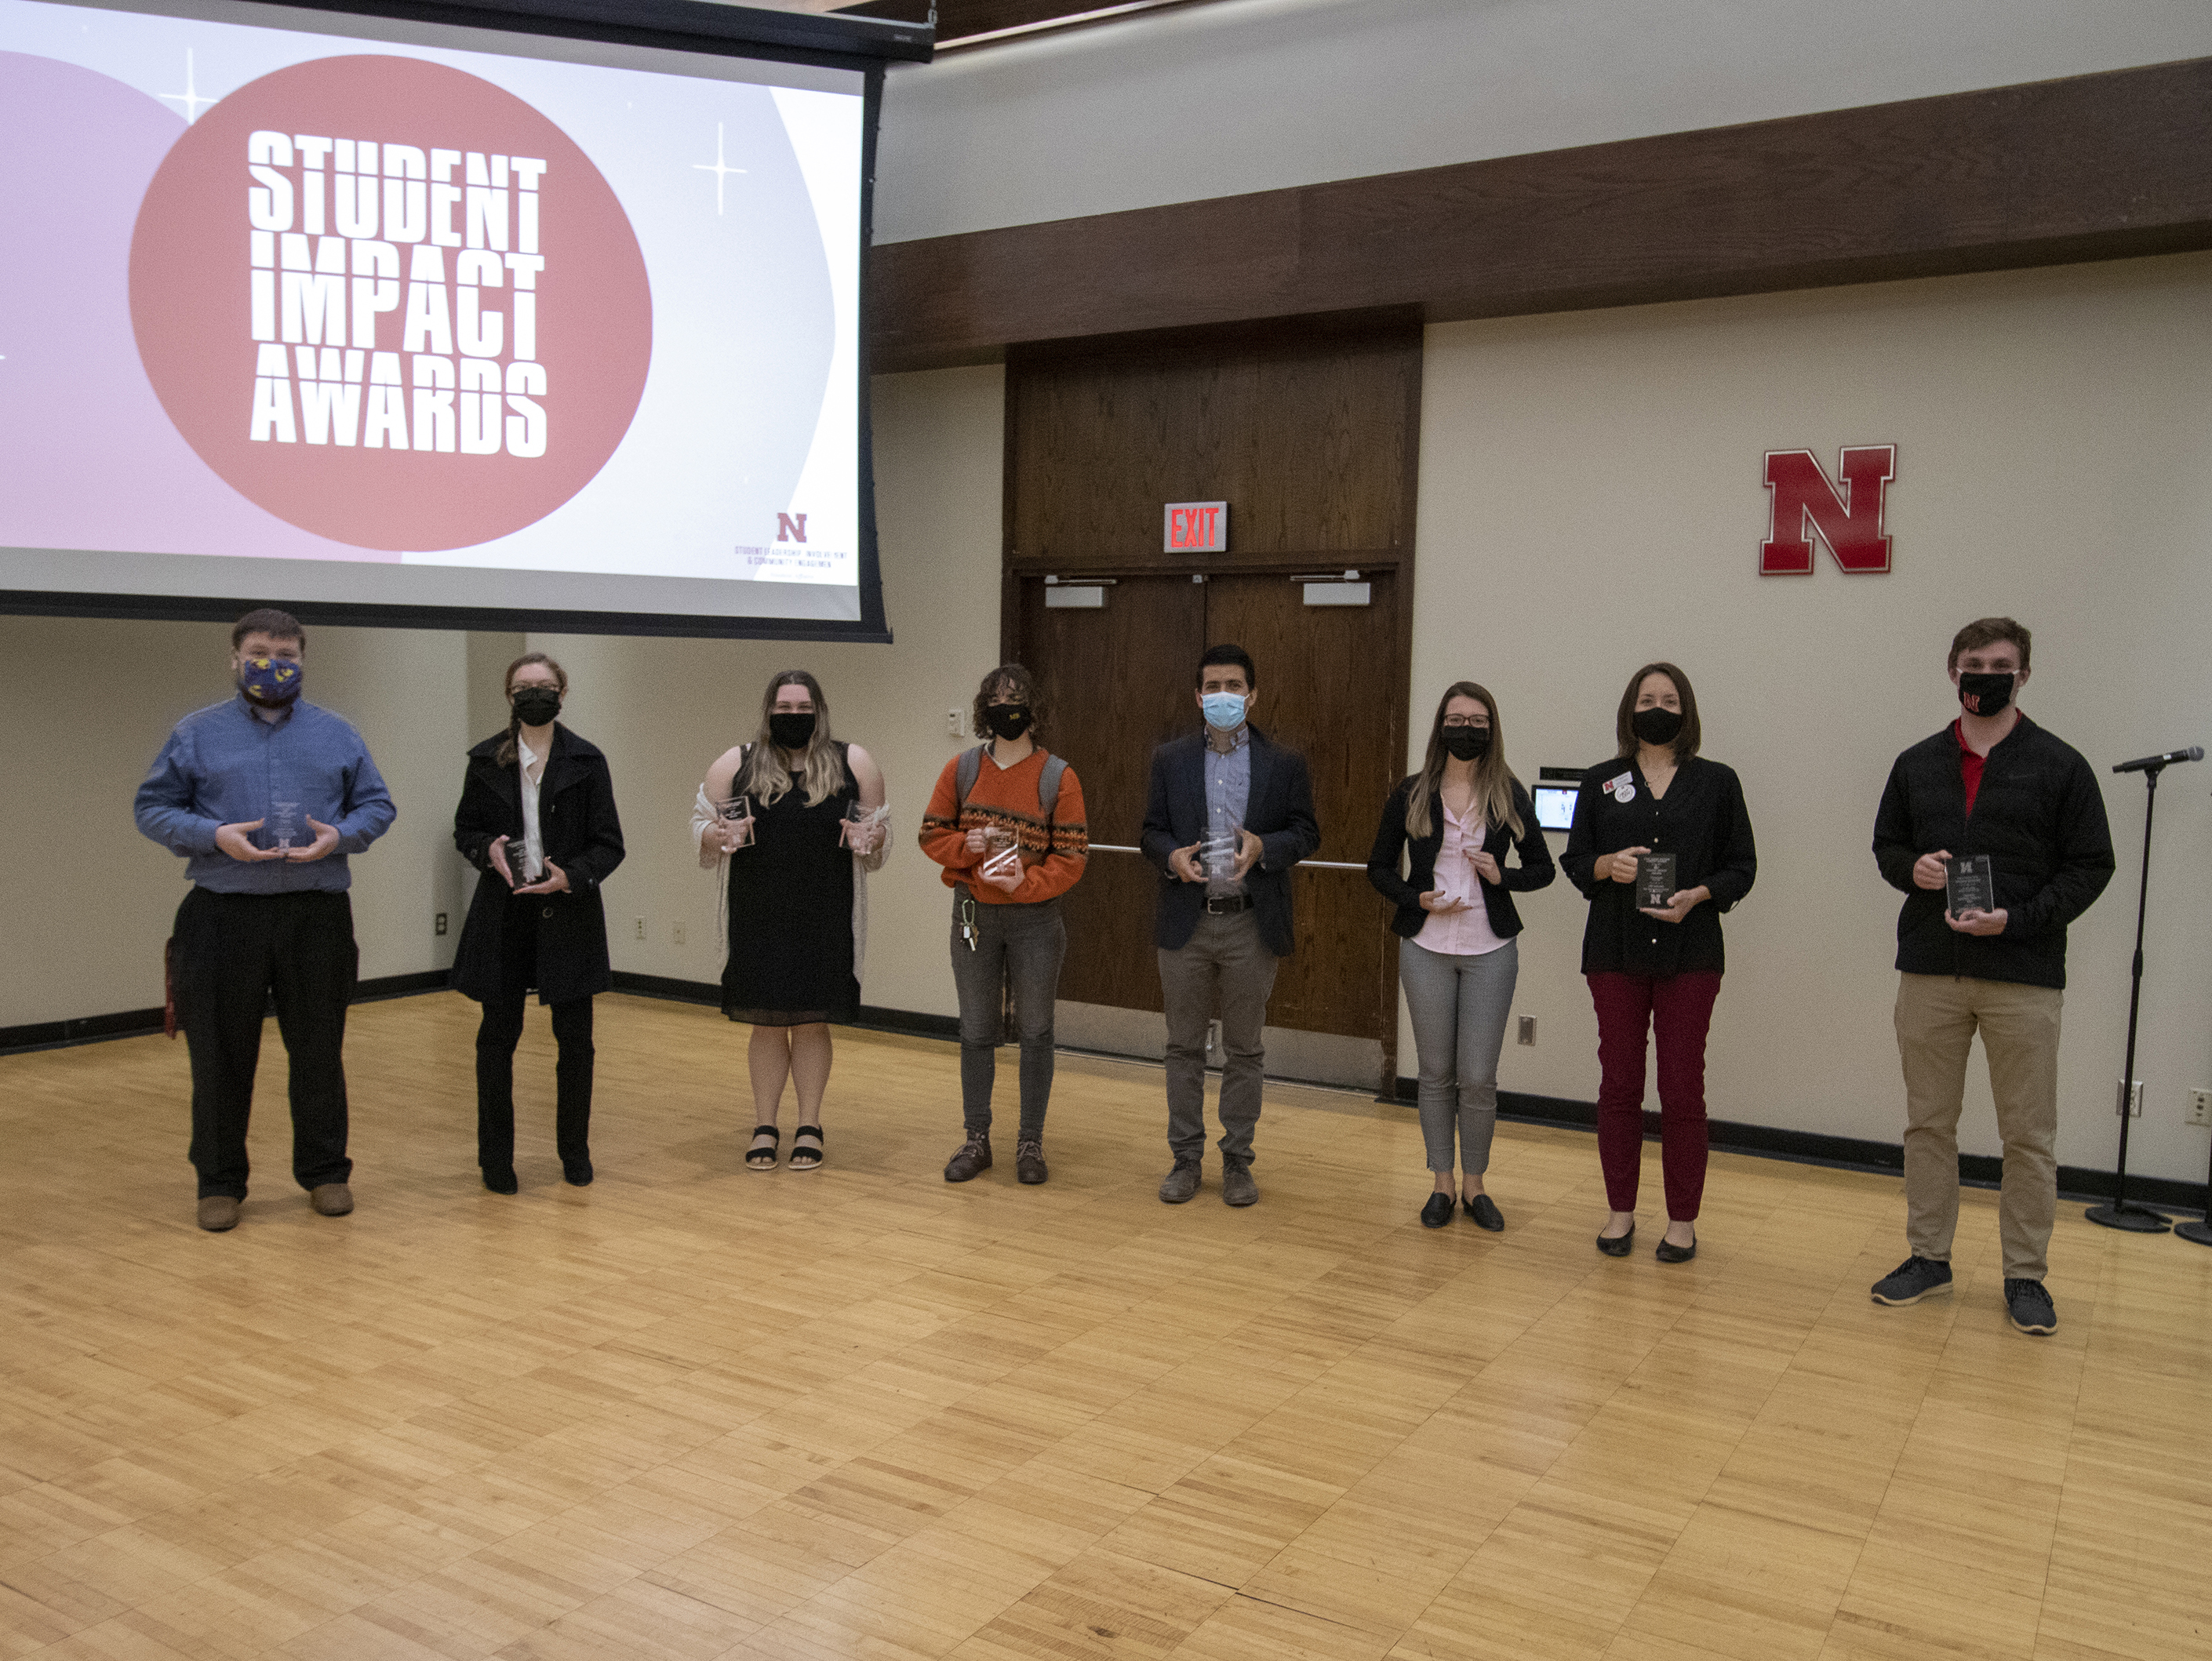 Winners received their Student Impact Awards at a reception on April 15.  [photo: Mike Jackon | Student Affairs]